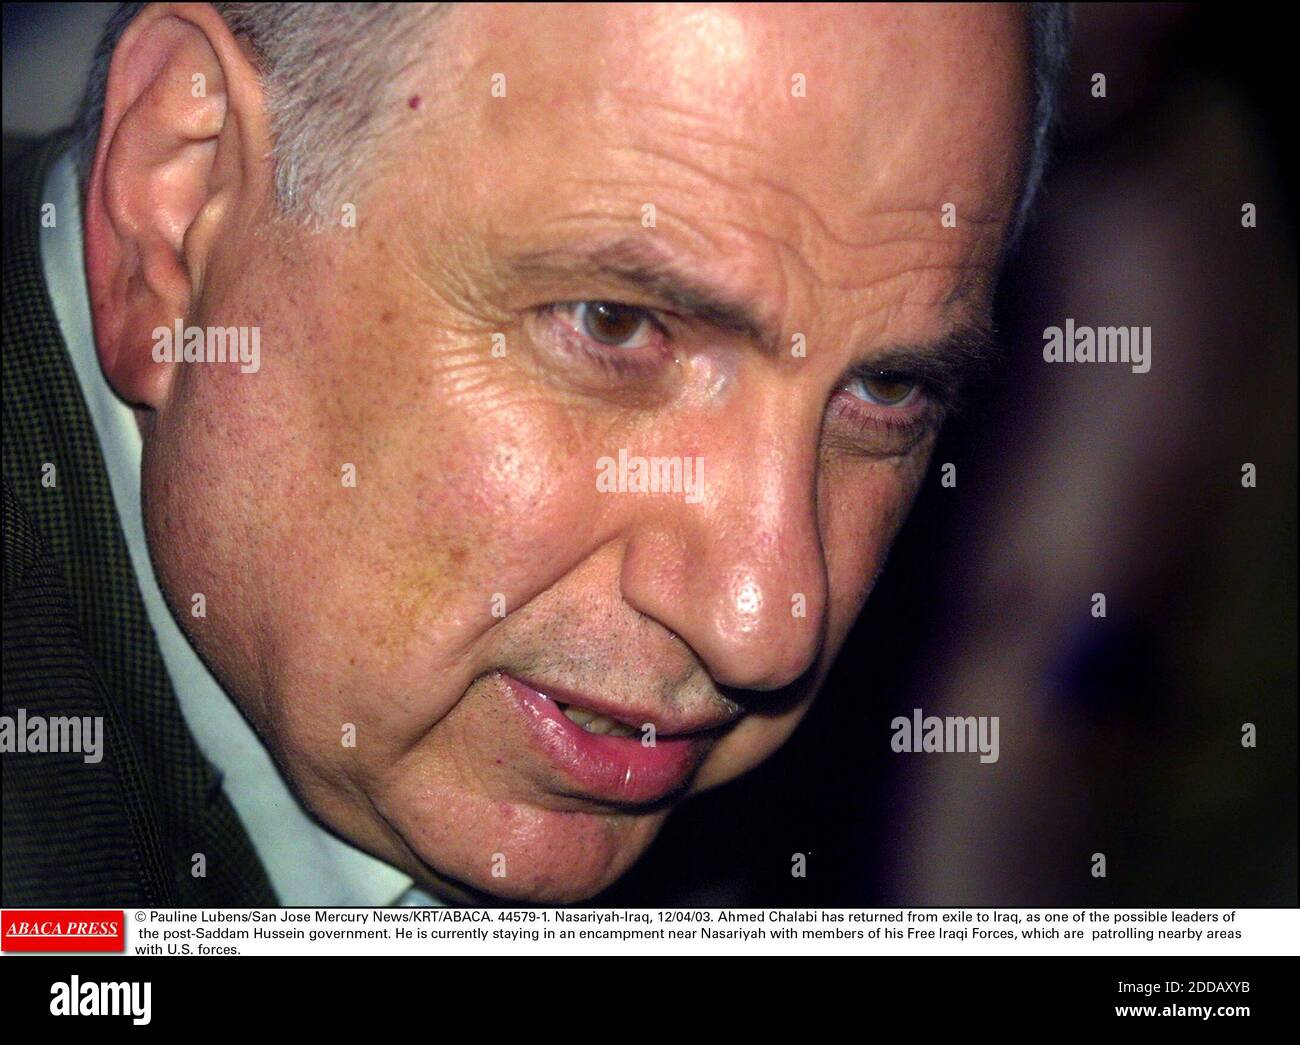 NO FILM, NO VIDEO, NO TV, NO DOCUMENTARY - © Pauline Lubens/San Jose Mercury News/KRT/ABACA. 44579-1. Nasariyah-Iraq, 12/04/03. Ahmed Chalabi has returned from exile to Iraq, as one of the possible leaders of the post-Saddam Hussein government. He is currently staying in an encampment near Nasariy Stock Photo